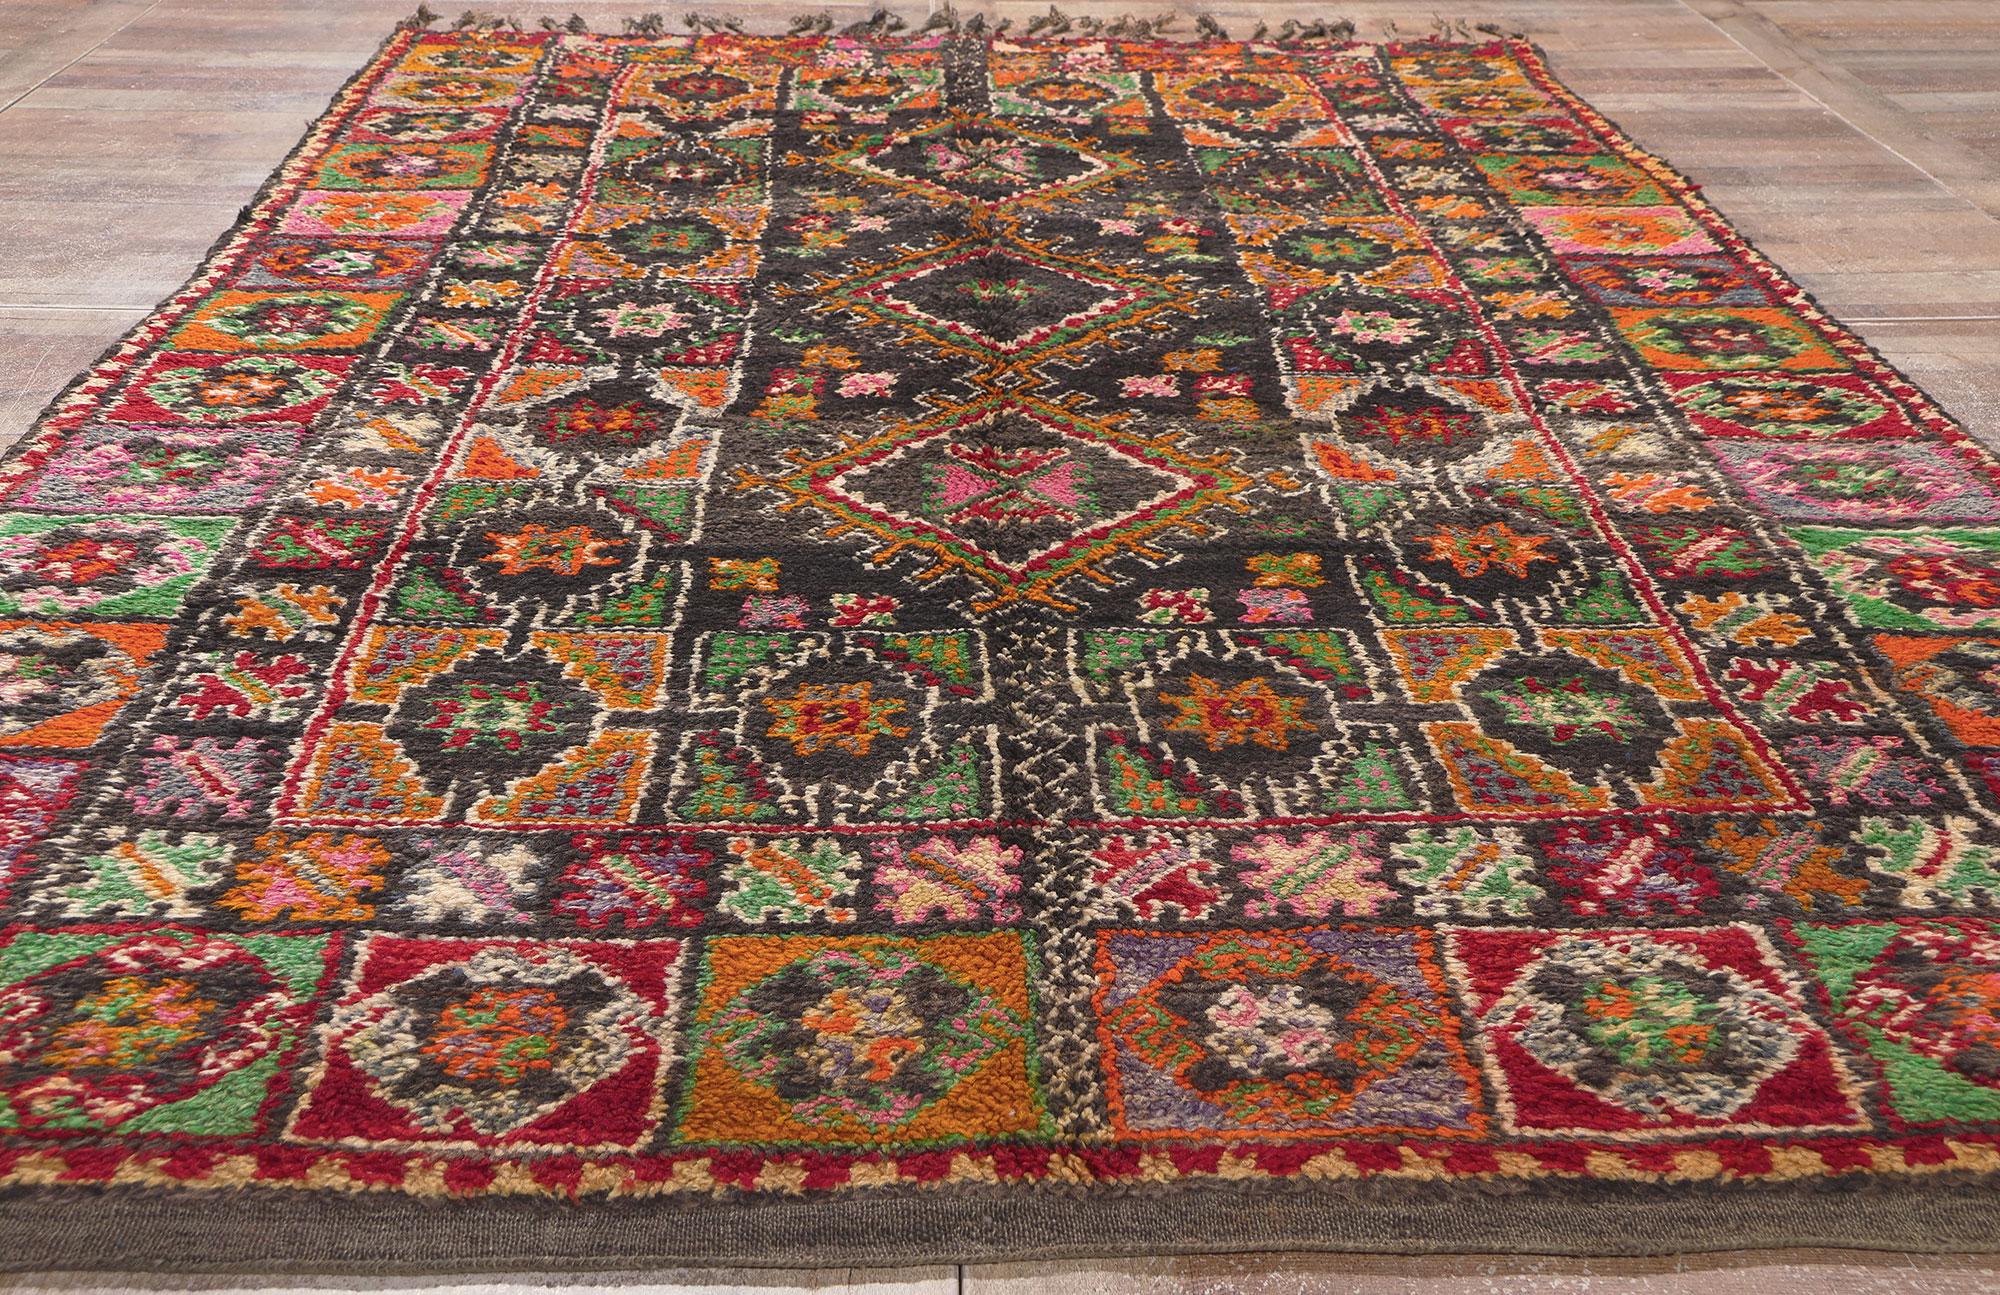 Wool Vintage Boujad Moroccan Rug, Eclectic Jungalow Meets Colorful Boho For Sale